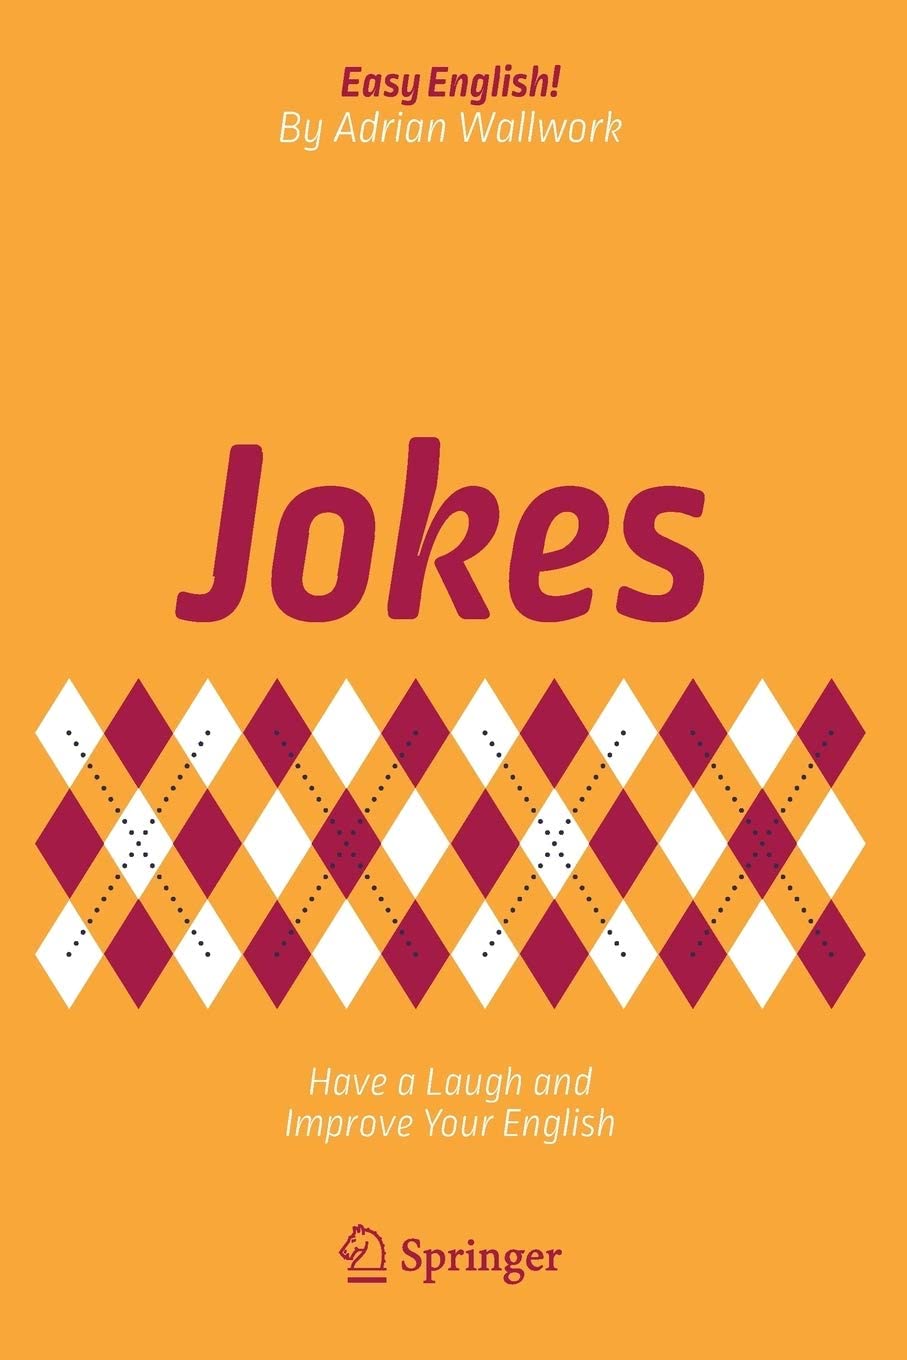 Jokes: Have a Laugh and Improve Your English (Easy English!)